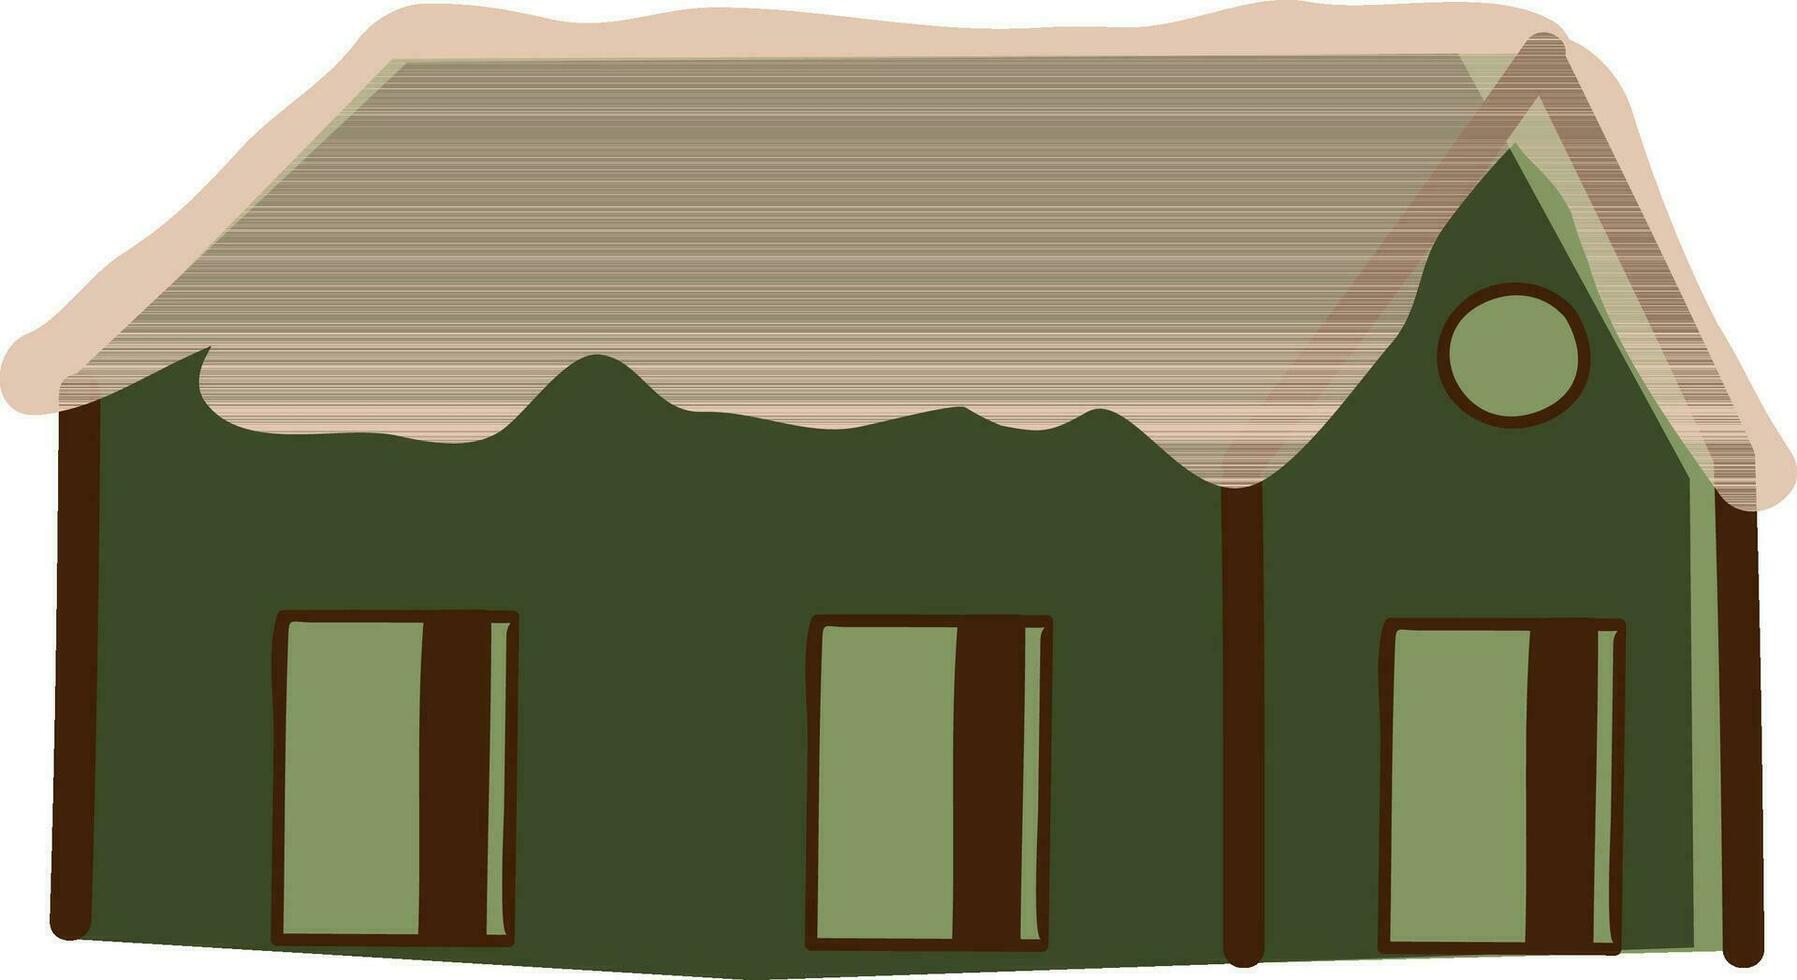 Green hut model covered with snow. vector